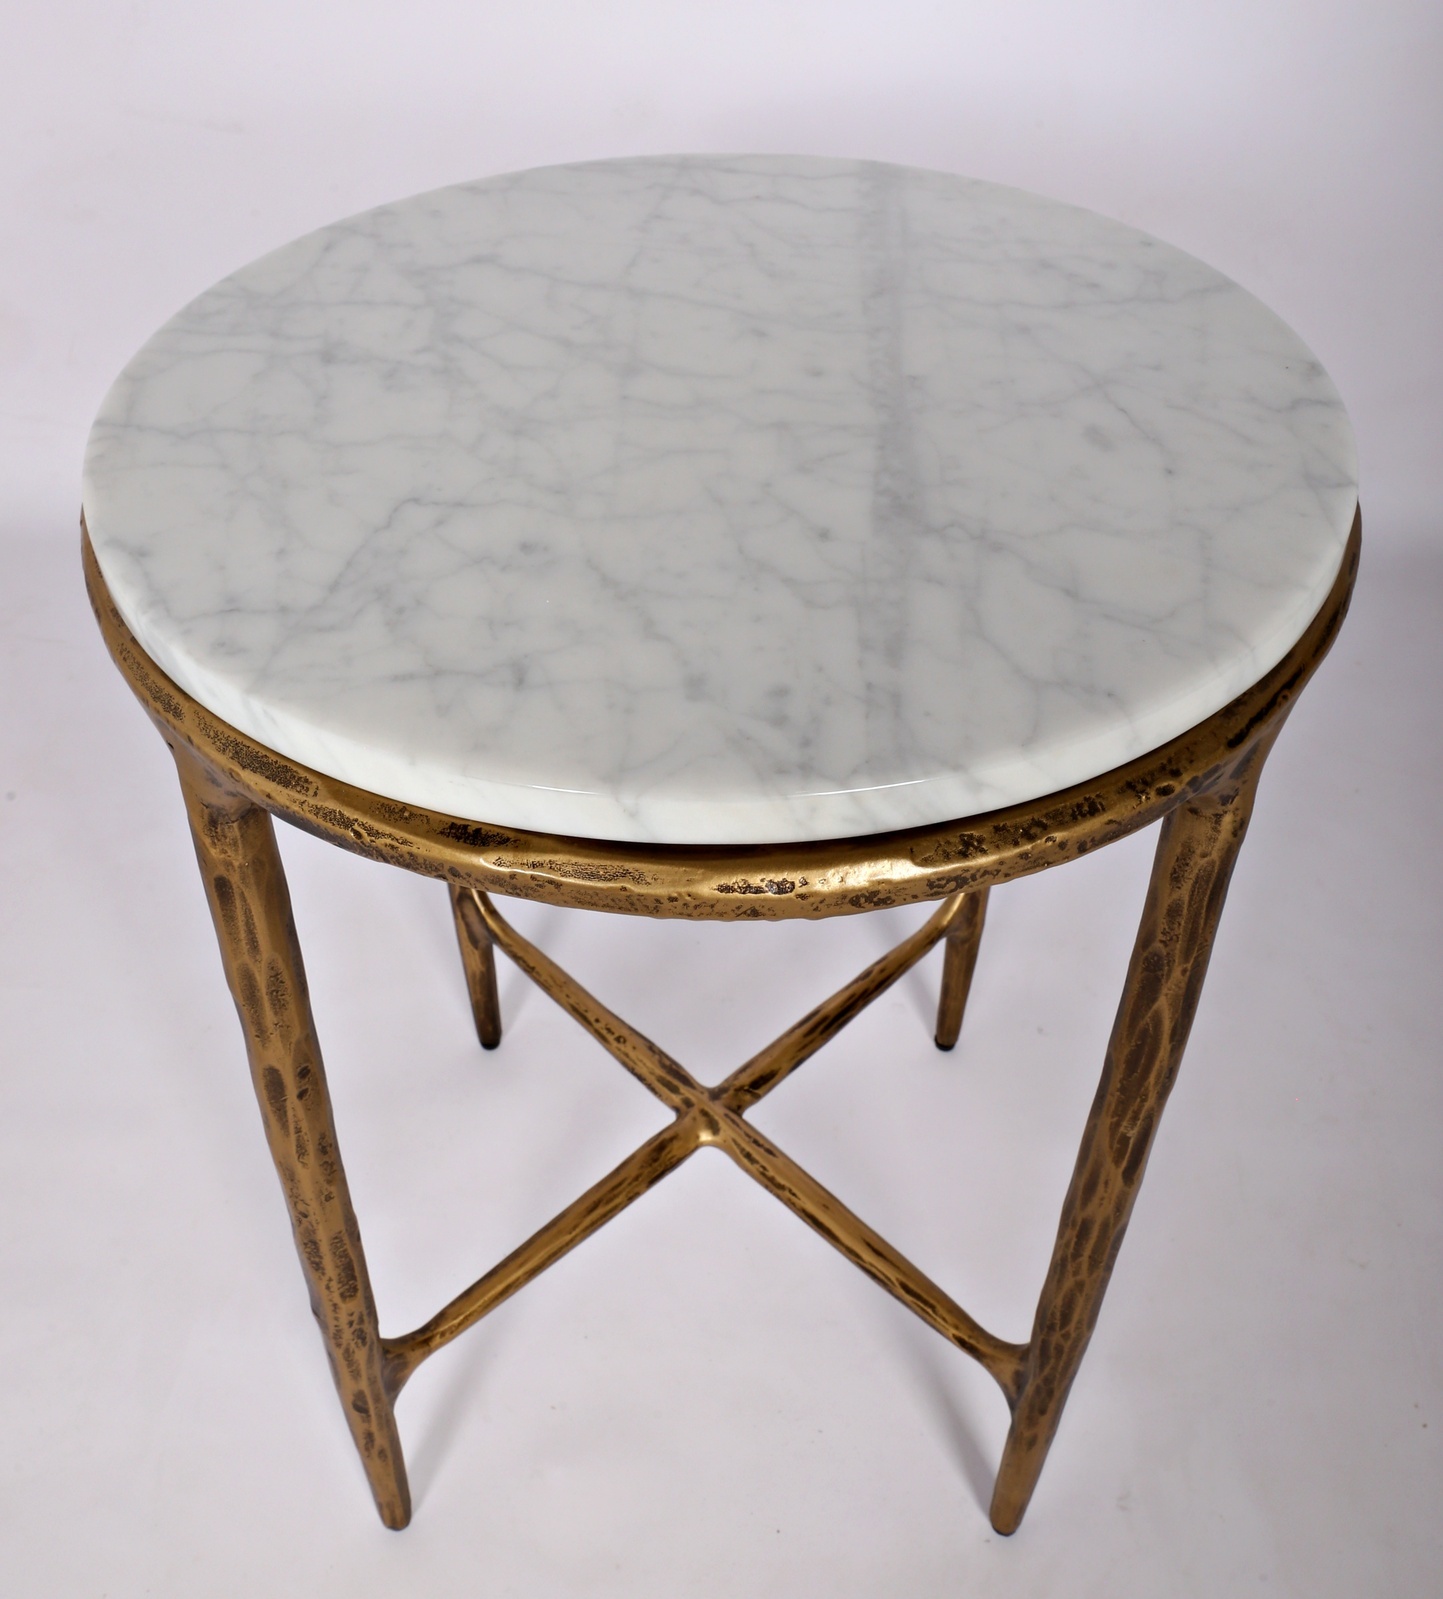 DEVILLE | ROUND MARBLE SIDE TABLE